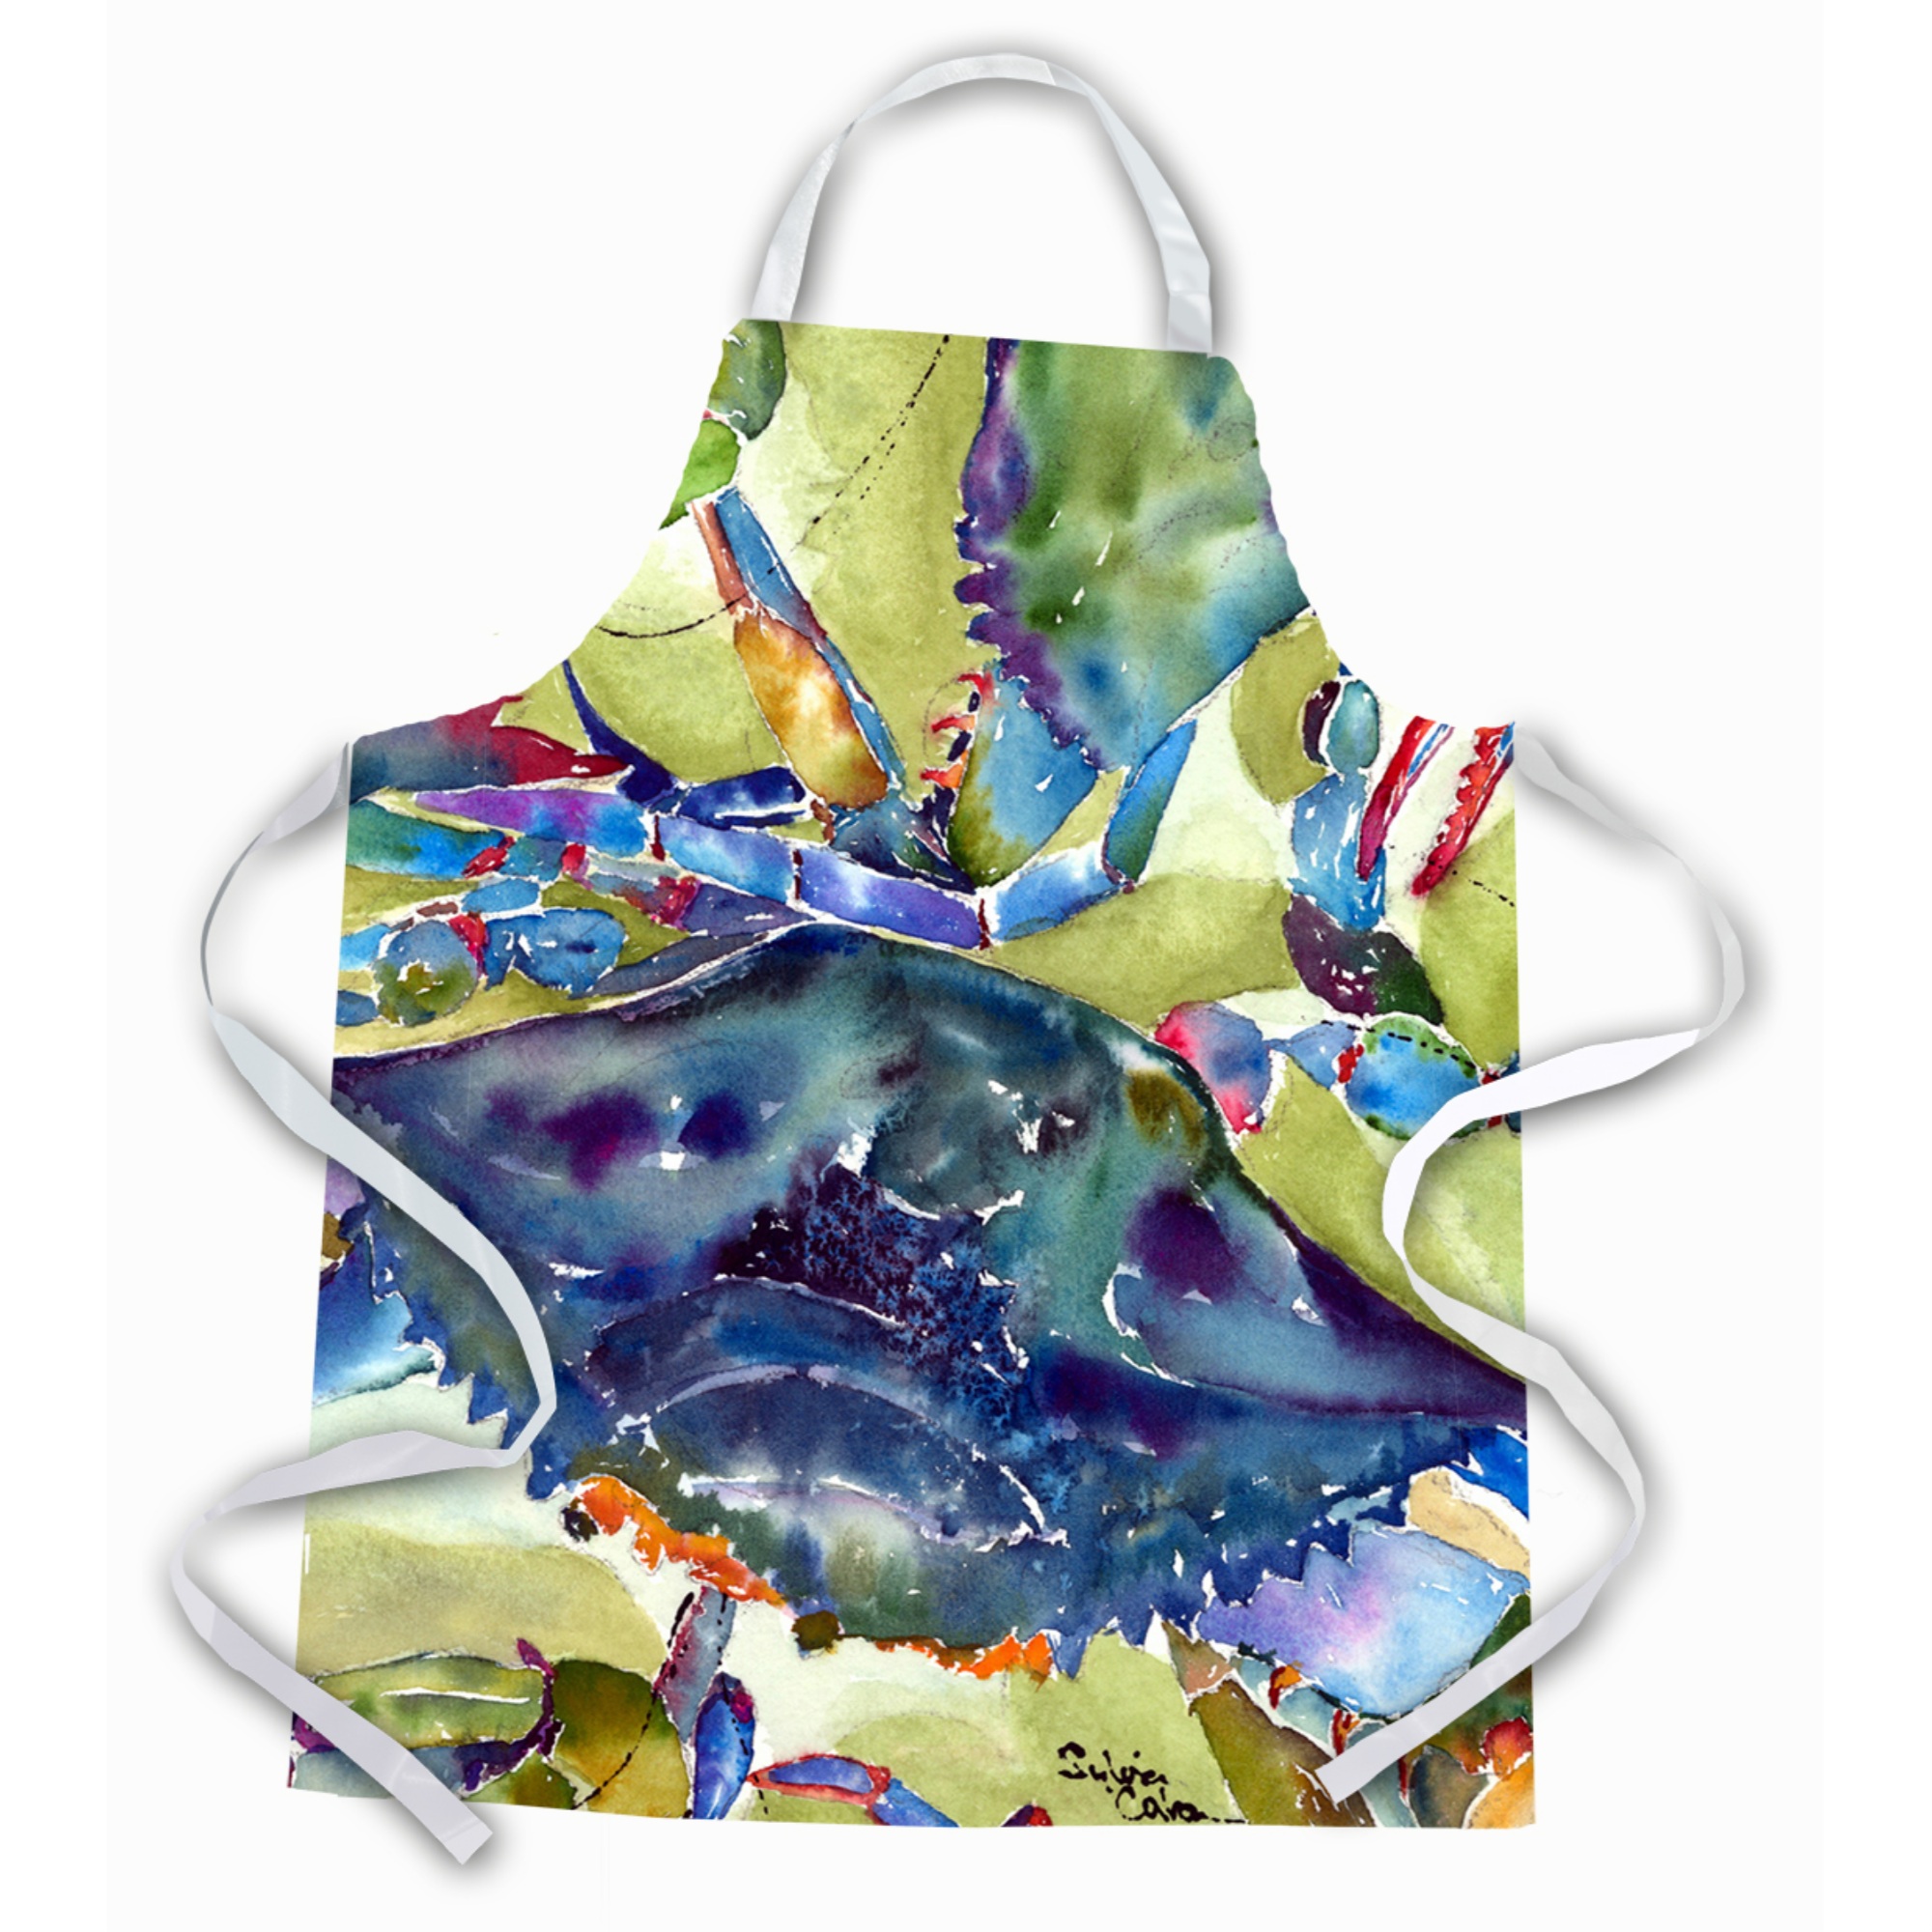 Caroline's Treasures "Caroline's Treasures 8512APRON Crab All Over Apron, Large, Multicolor"